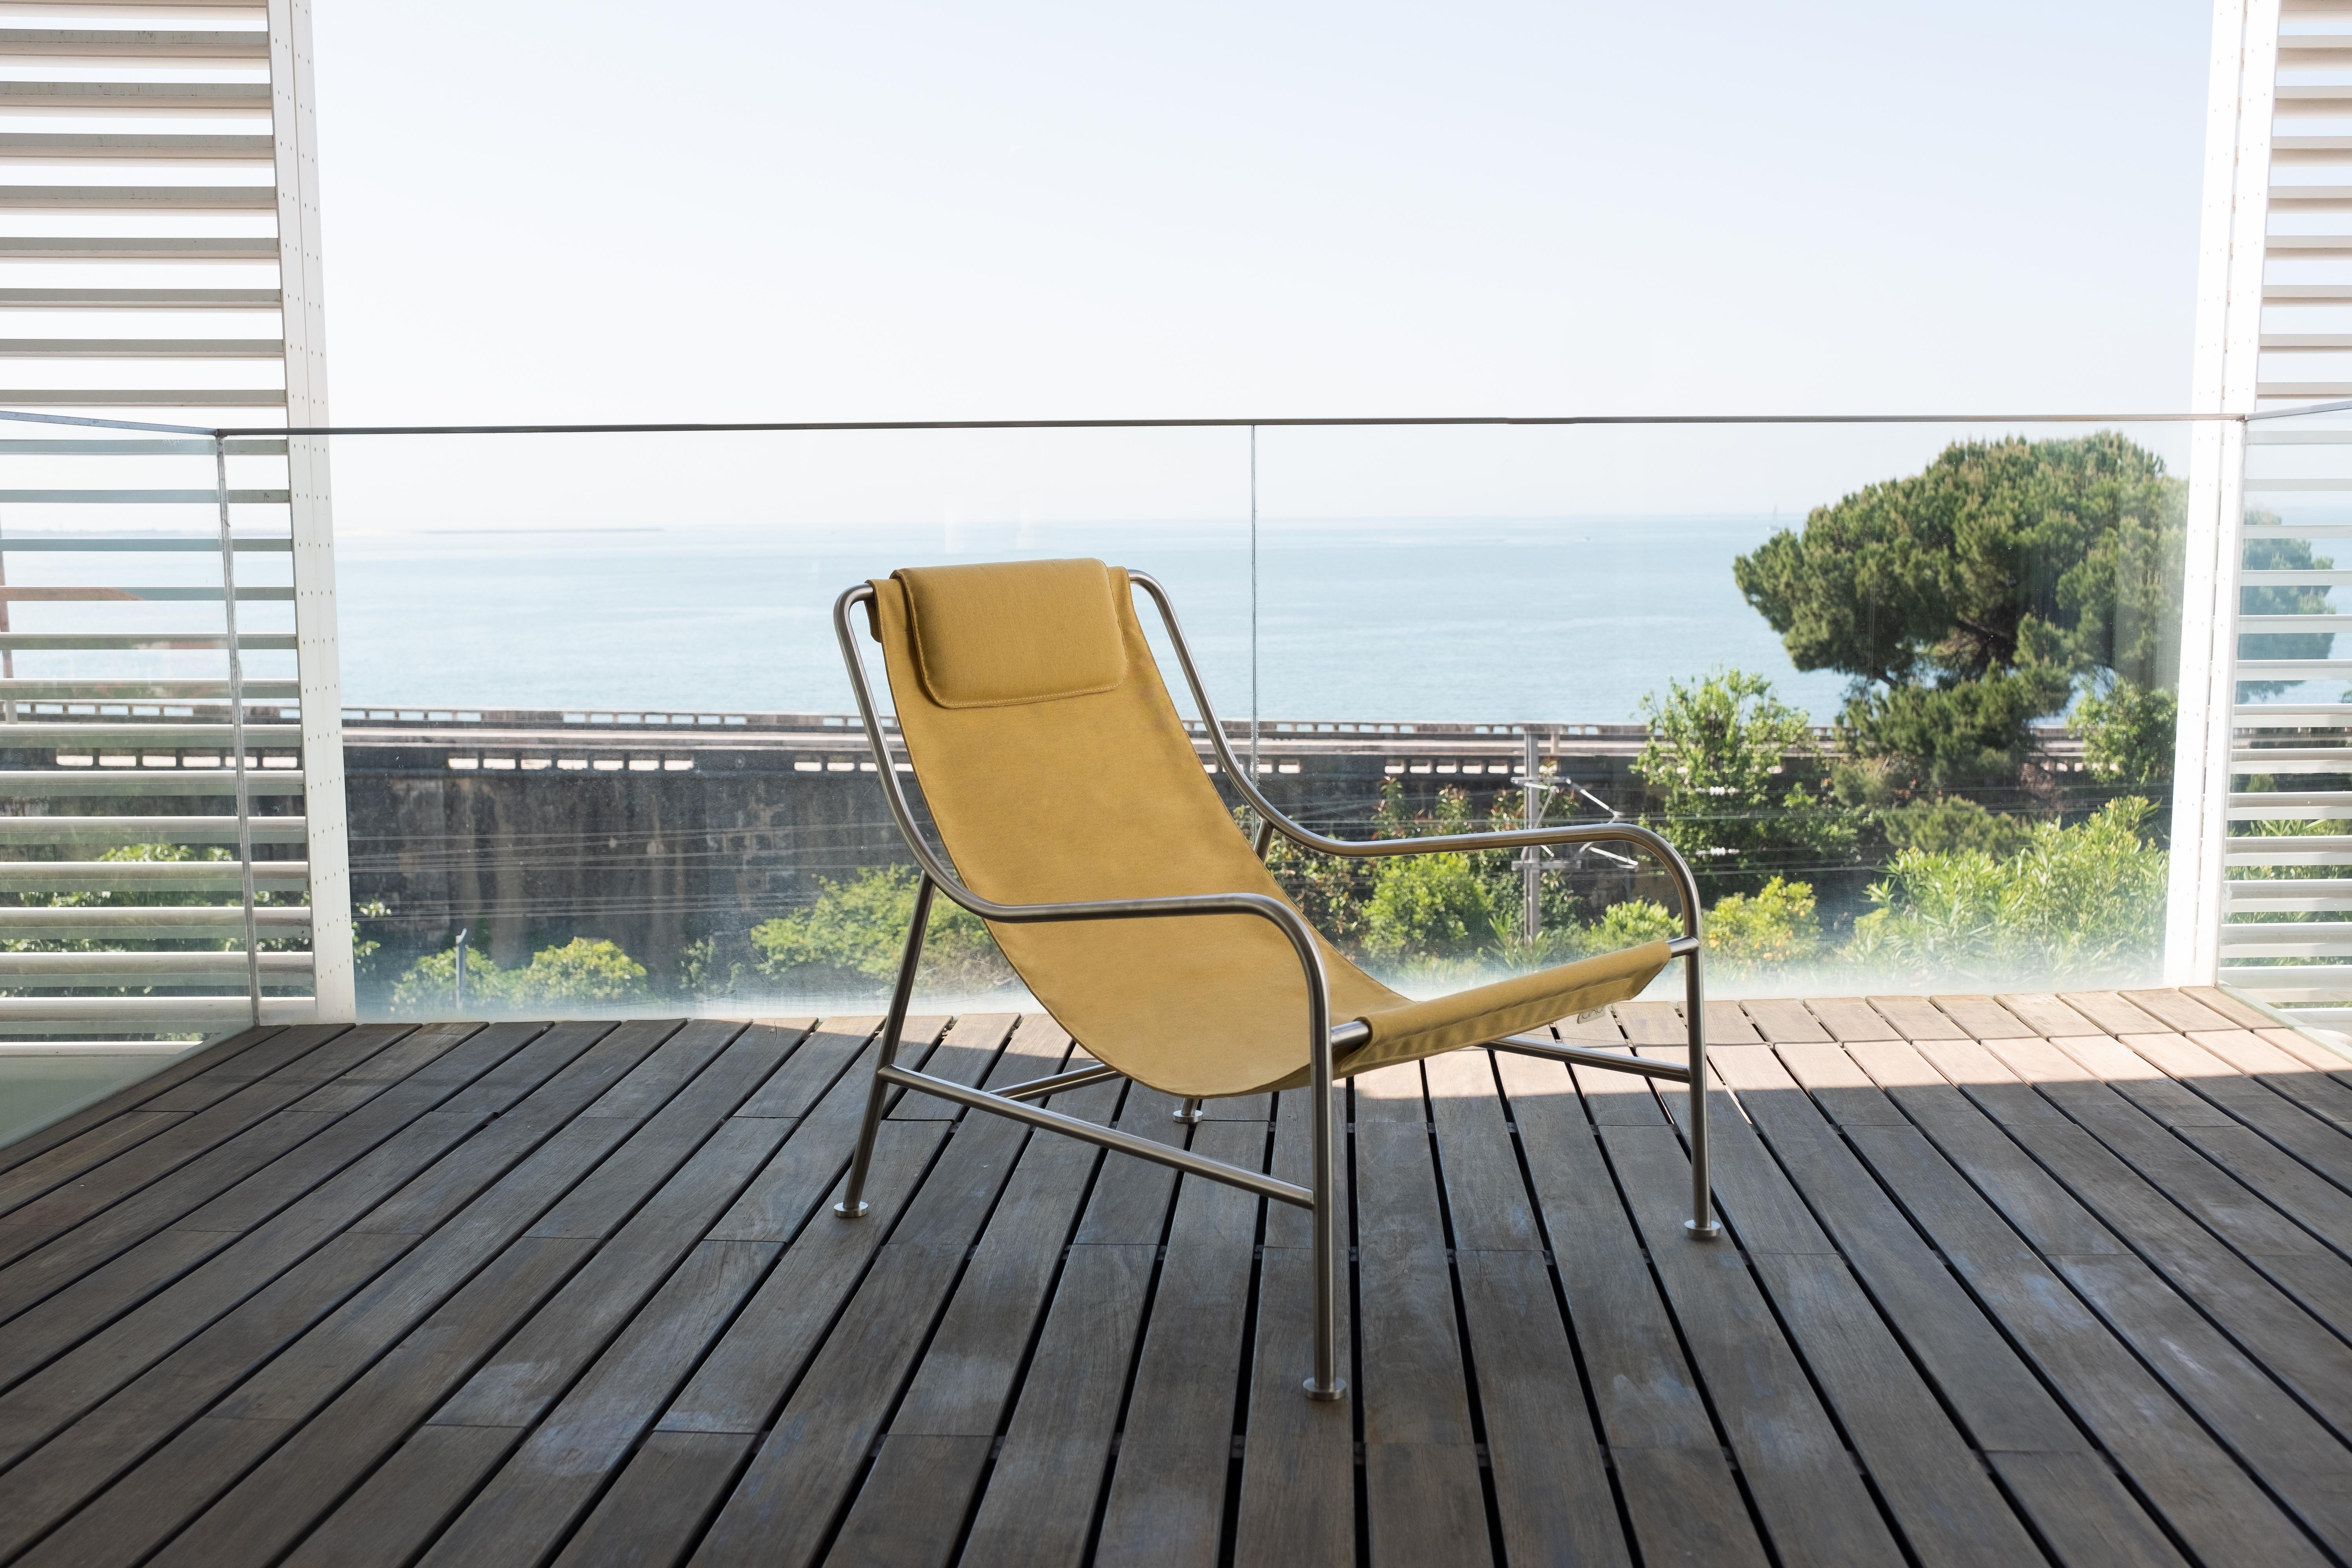 Portuguese Minimalist Outdoor Lounge Chair in 